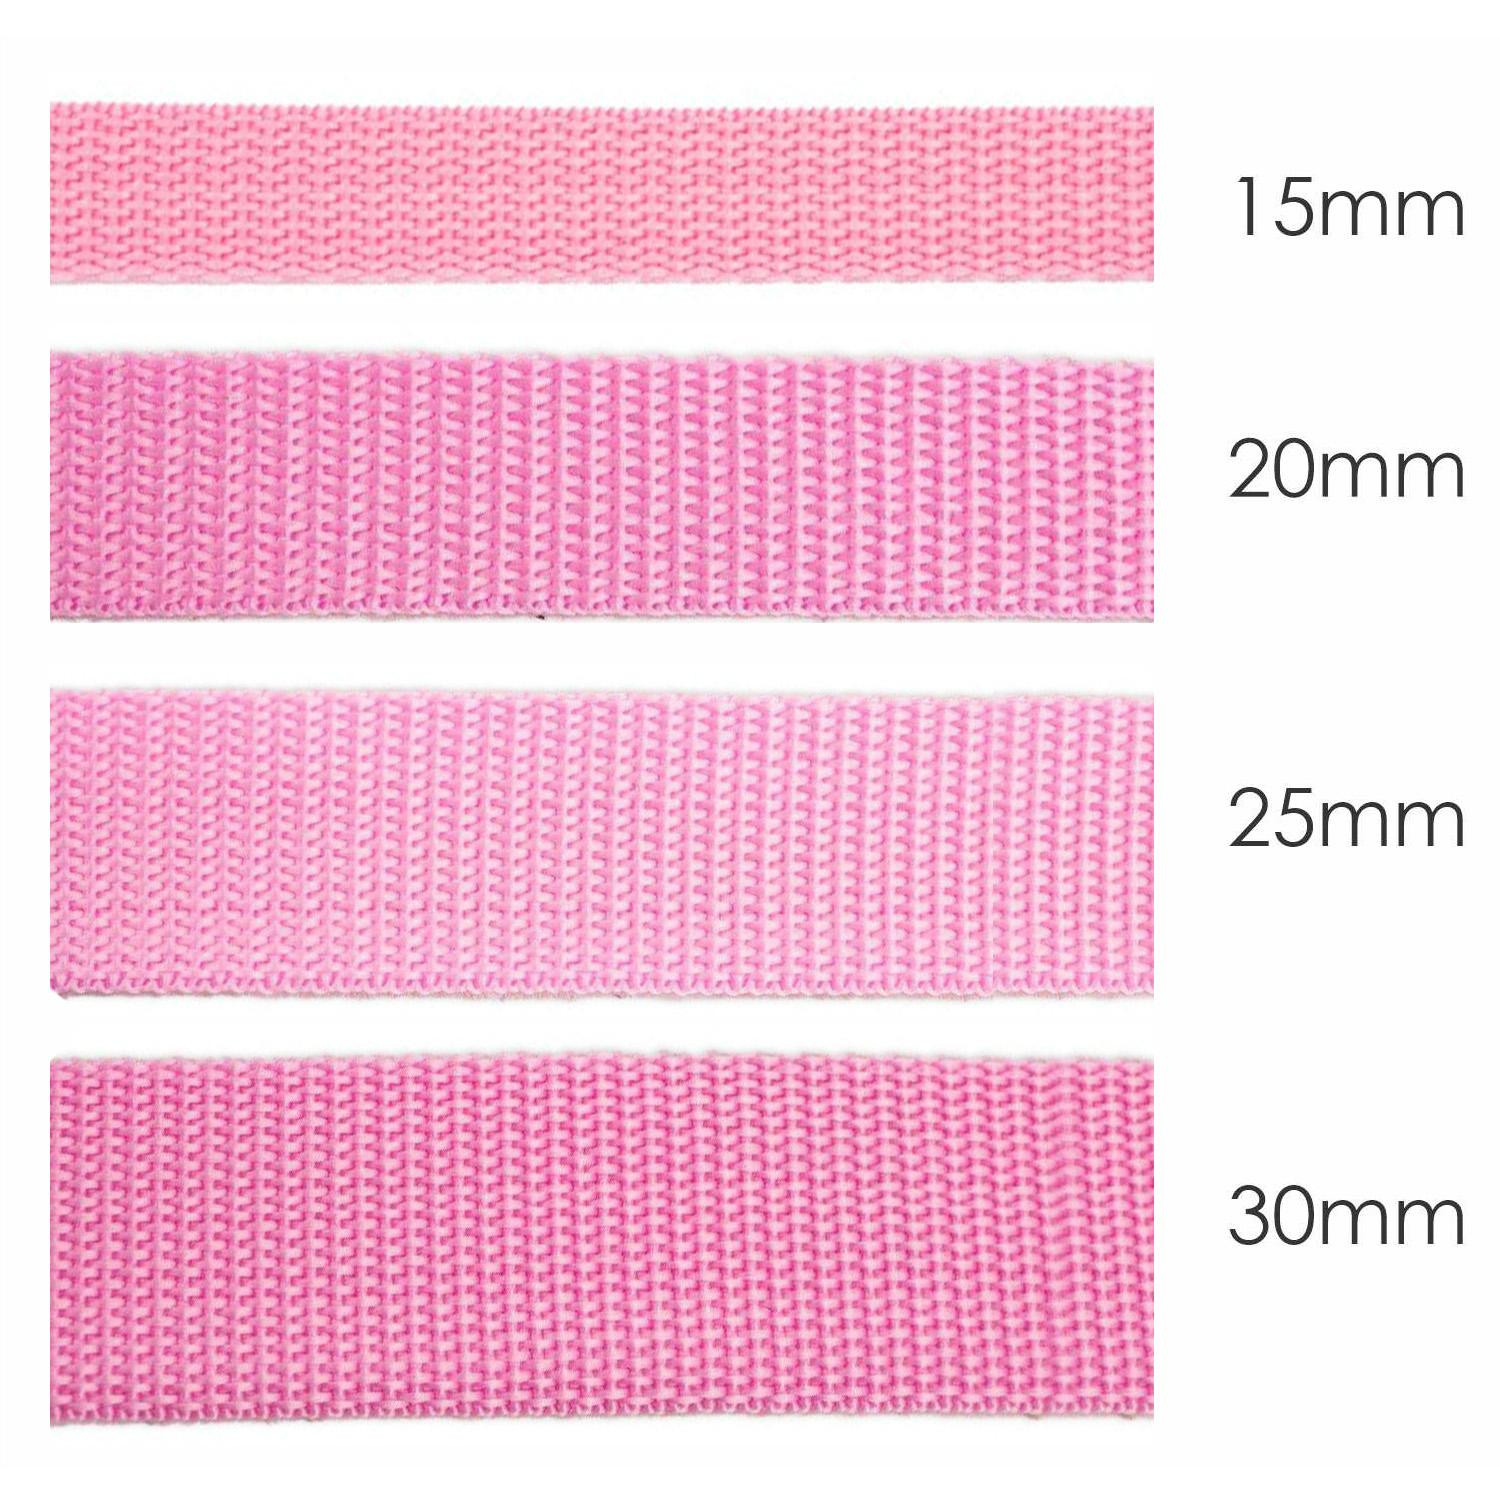 Webbing tape - pink / Choice of sizes